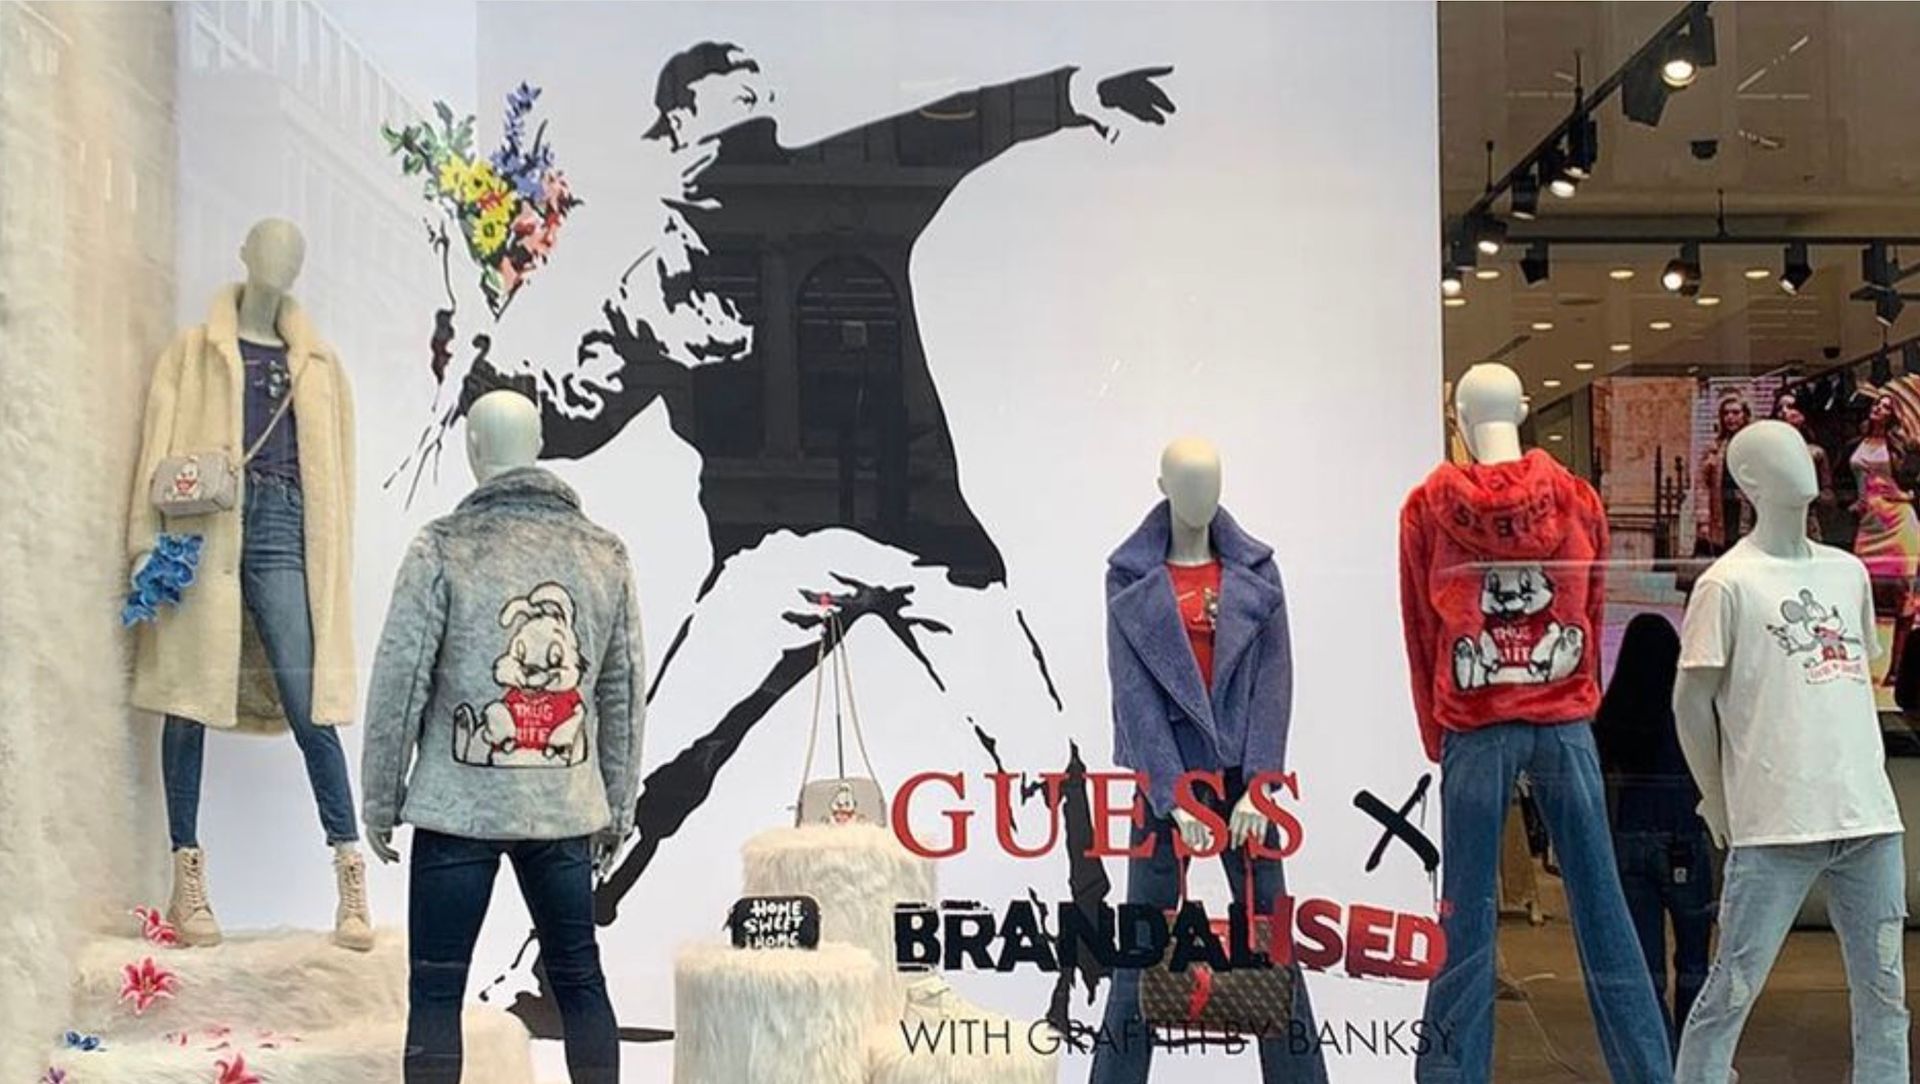 A replica of Banksy's famed Flower Thrower stencil in the window display of a Guess store in London Photo via @Banksy/Instagram